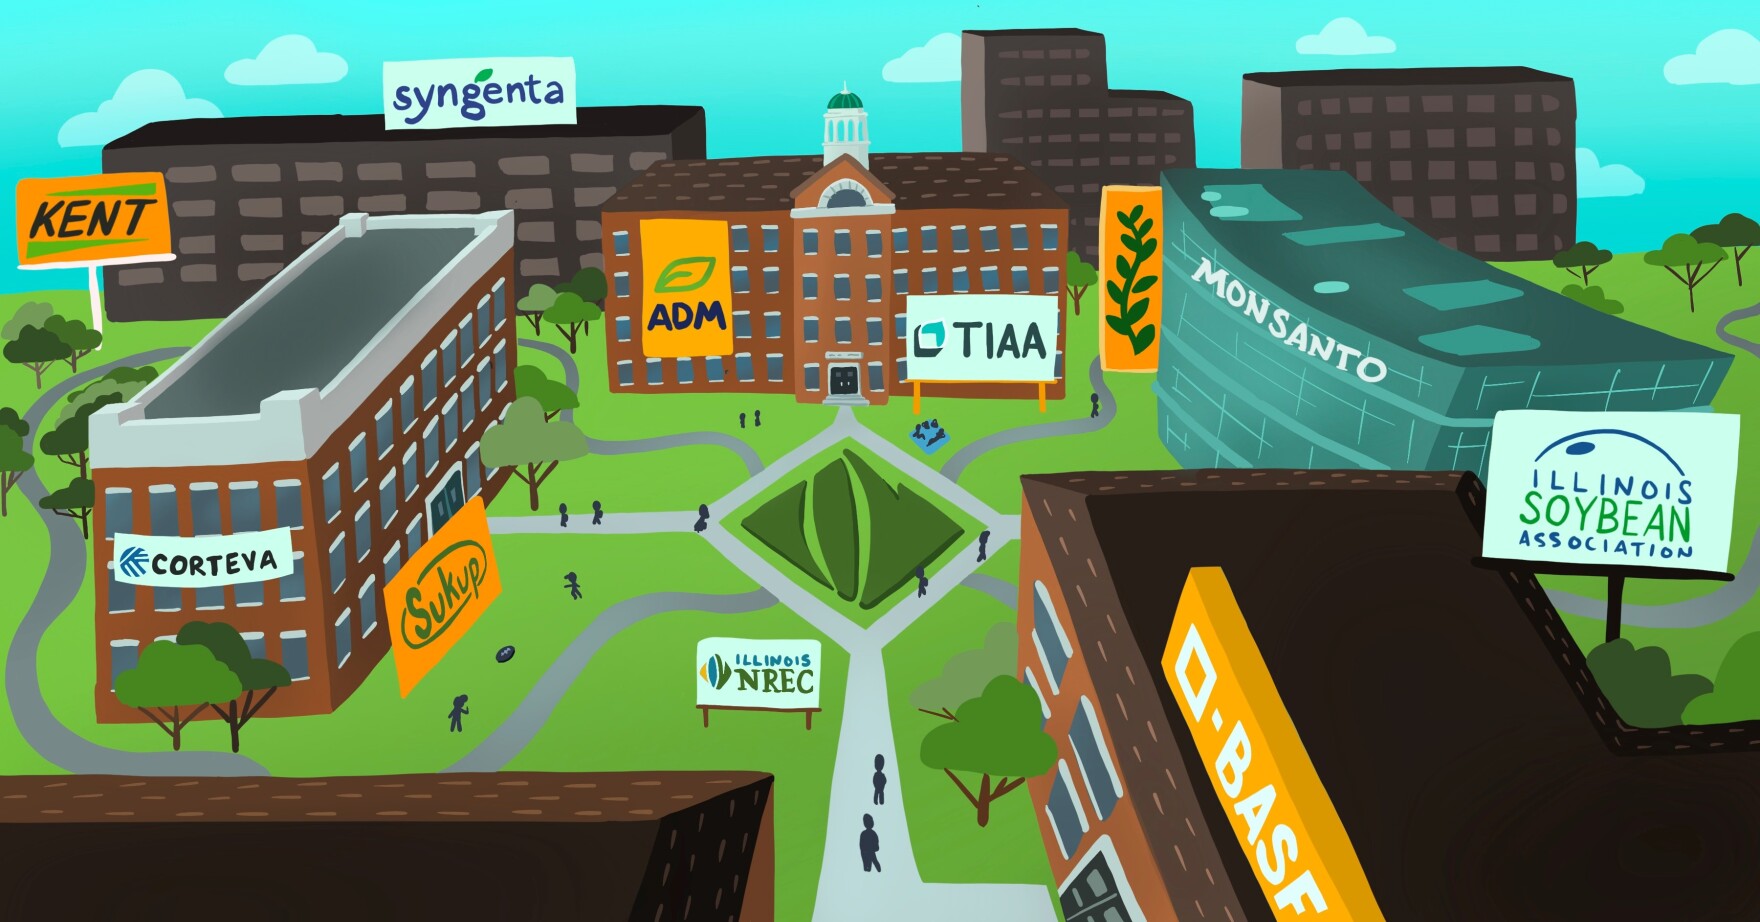 an illustration of a university campus with signs on each building that read "kent, syngenta, corteva, sukup, adm, illinois nrec, tiaa, monsanto, illinois soybean association, and o-basf"